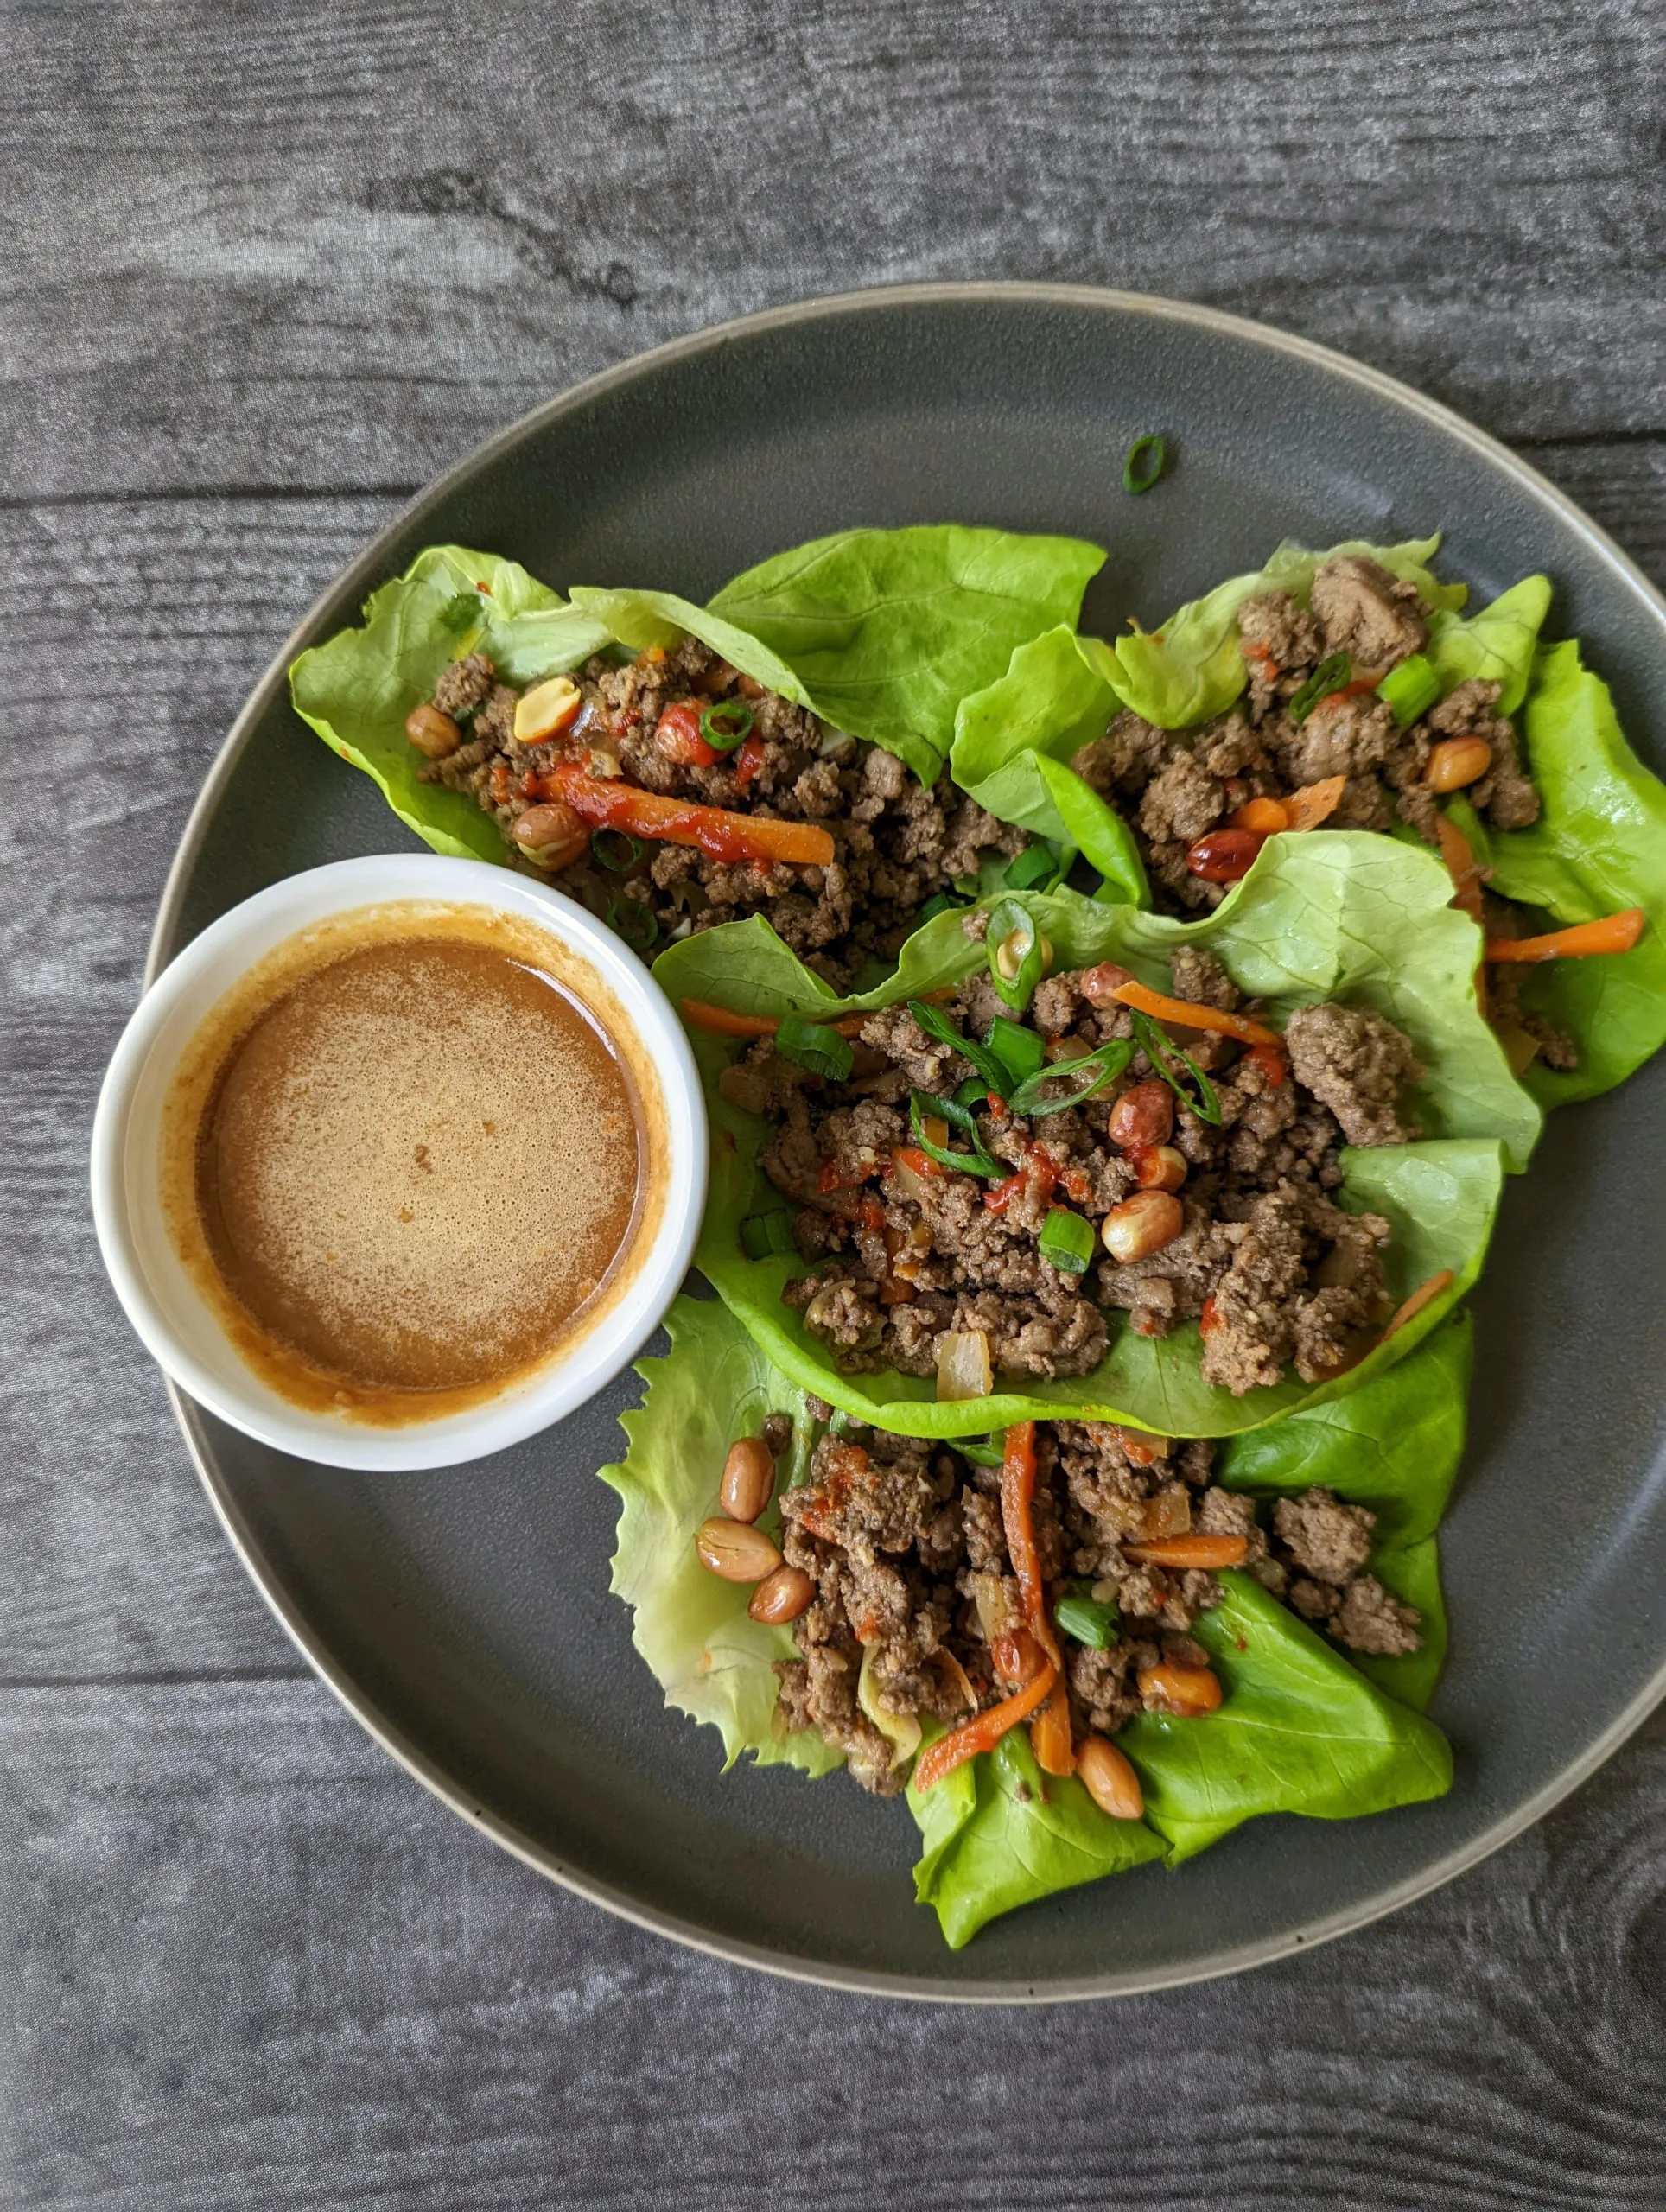 Beef lettuce wraps garnished with scallions, peanuts, and Sriracha.